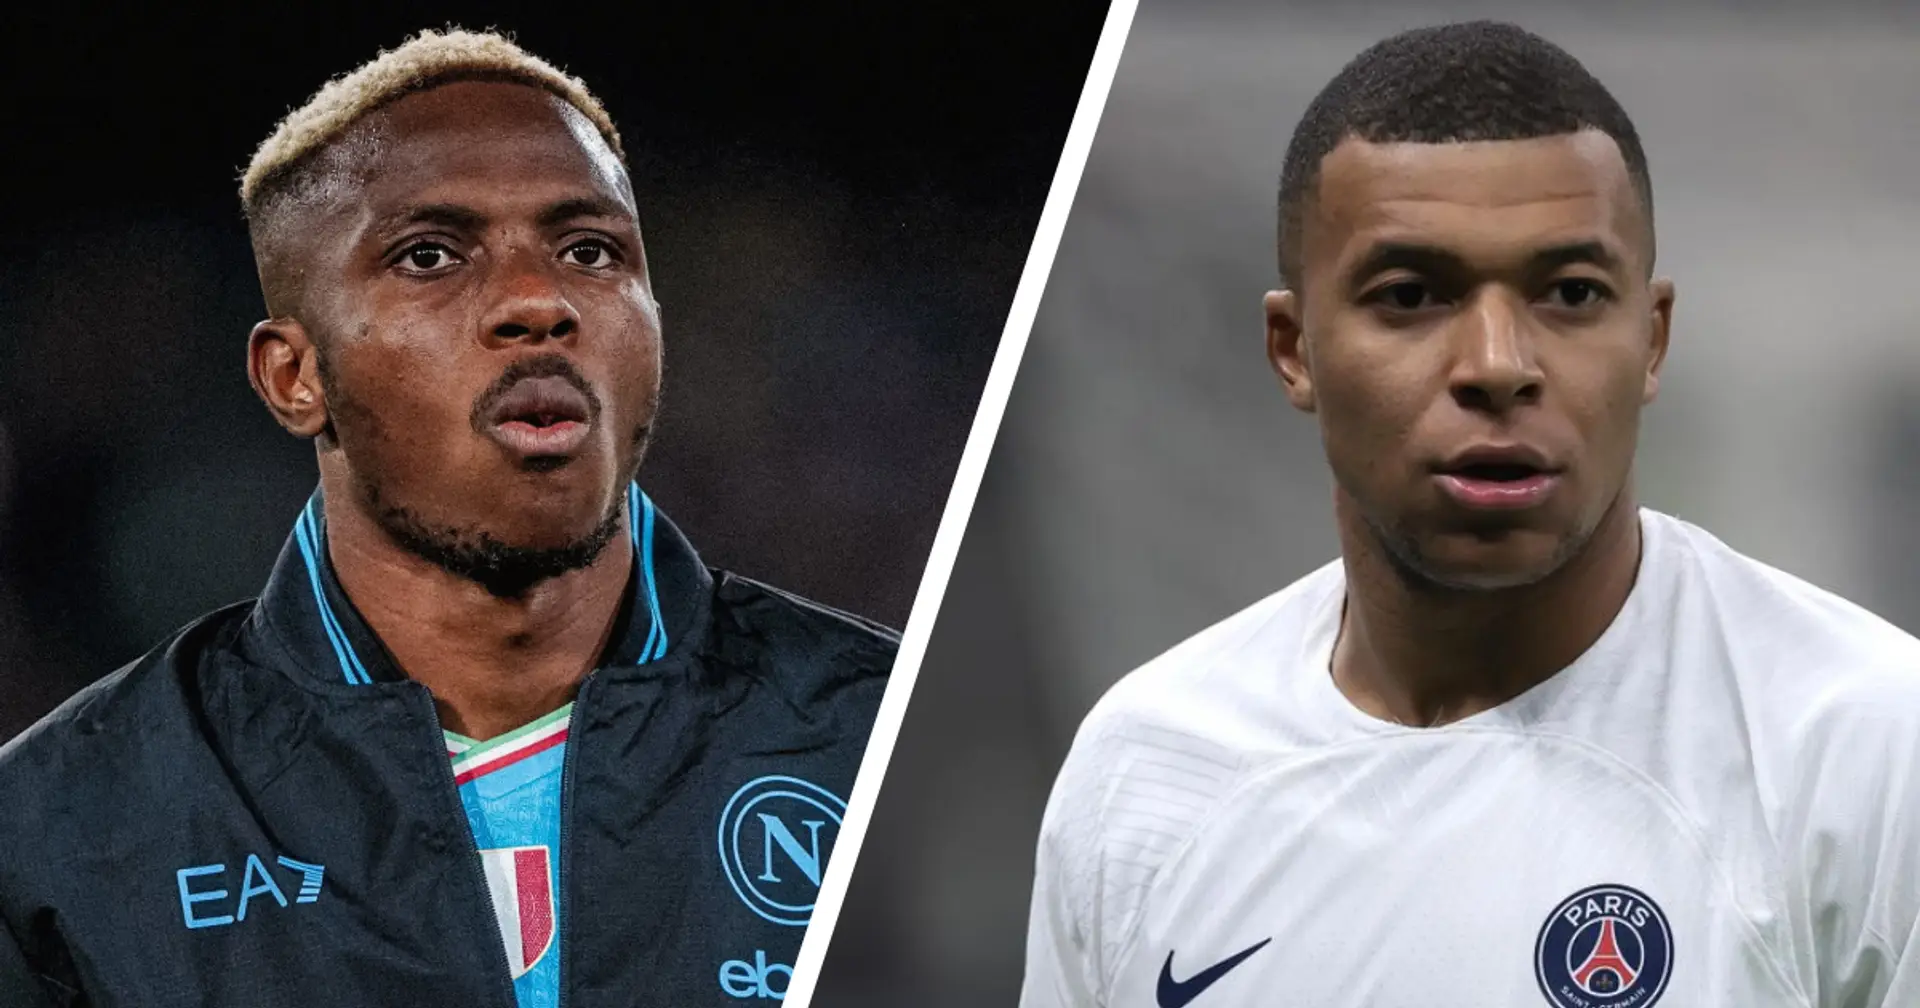 Two Victors from Nigeria and one Mbappe — fans recommend players from their countries to Liverpool